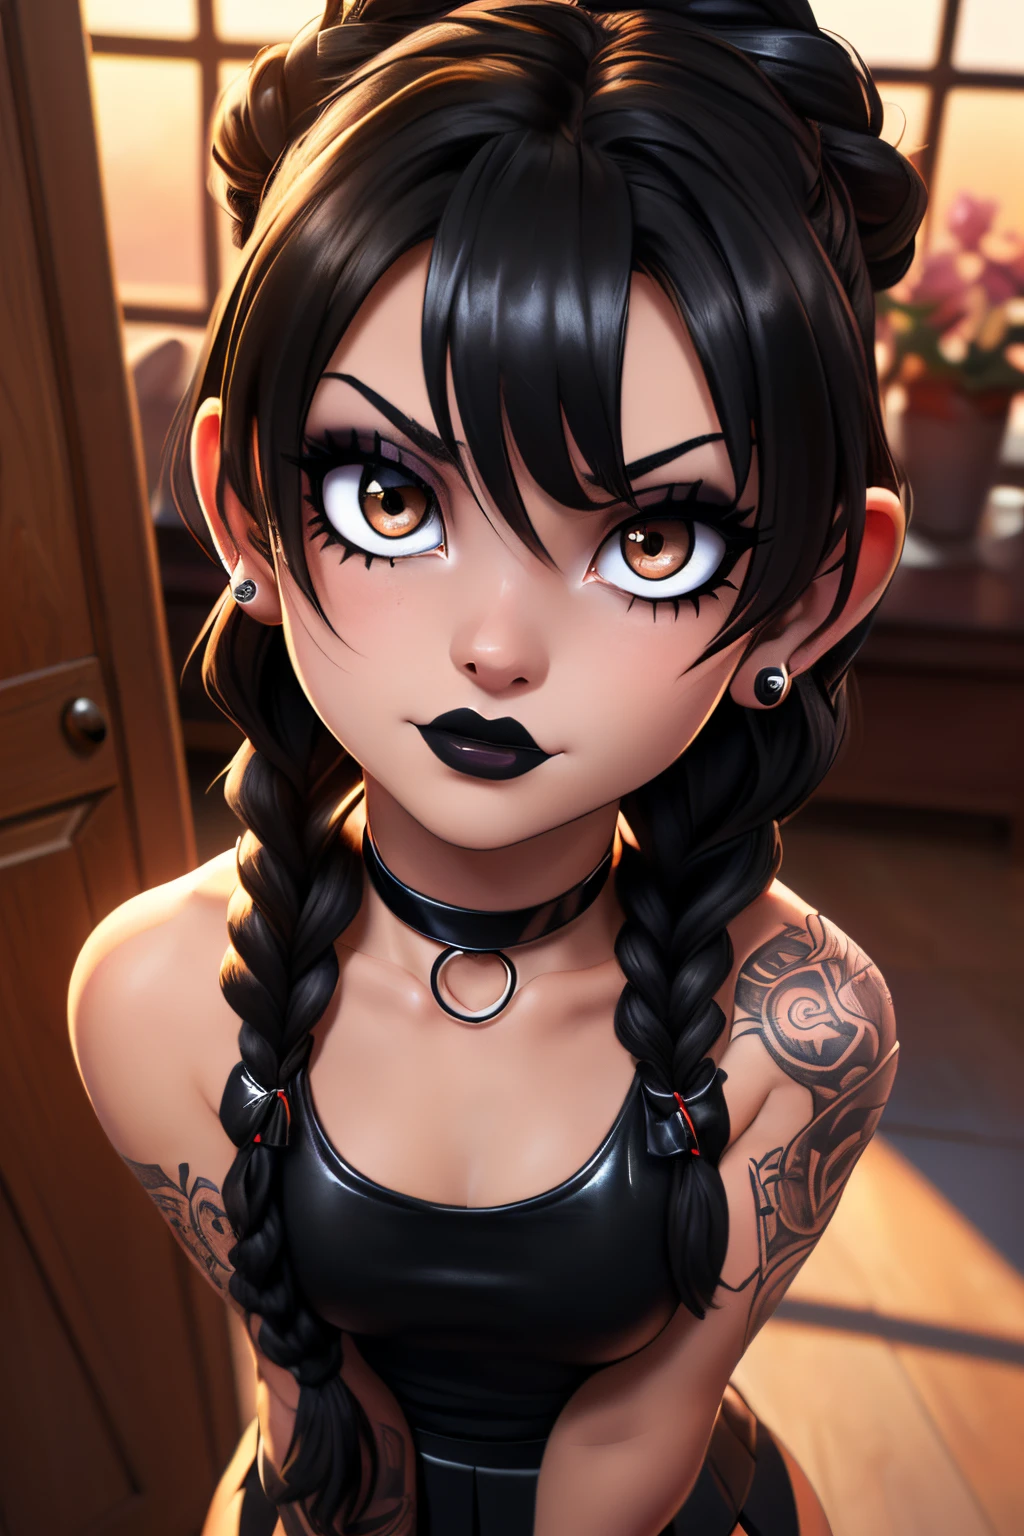 ((ultra quality)), ((tmasterpiece)), goth girl, ((long black hair braided into one braid), ((there are piercings and rings in the ears)), Beautiful cute face, beautiful female lips, ((dark makeup)), charming beauty, ((embarrassed expression)), is looking at the camera, ((Skin color: white)), ((have tattoos on the body)), Body glare, ((detailed beautiful female eyes)), ((dark brown eyes)), beautiful female hands, ((perfect female figure)), ideal female body shapes, Beautiful waist, nice feet, big thighs, Beautiful butt, ((Subtle and beautiful)), seductively worth it ((closeup face)), ((wearing a black leather skirt and a black sleeveless tank top, black choker around the neck, black boots with a large platform, black stockings)), background: Threshold of the house, evening sunset, ((Depth of field)), ((high quality clear image)), ((crisp details)), ((higly detailed)), Realistic, Professional Photo Session, ((Clear Focus)), ((cartoon)), the anime, NSFW